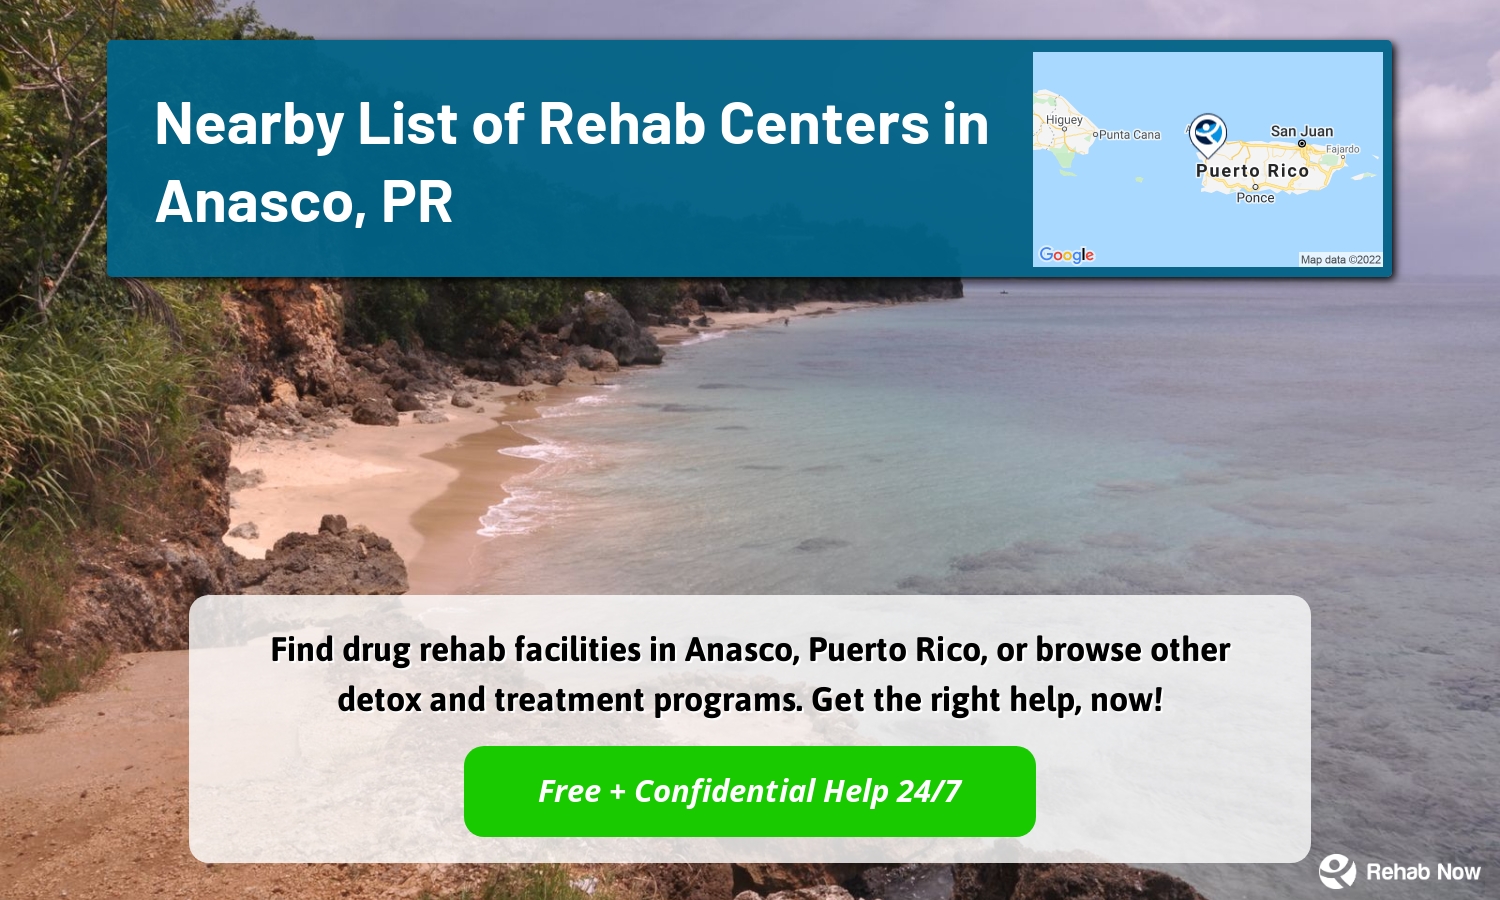 Find drug rehab facilities in Anasco, Puerto Rico, or browse other detox and treatment programs. Get the right help, now!